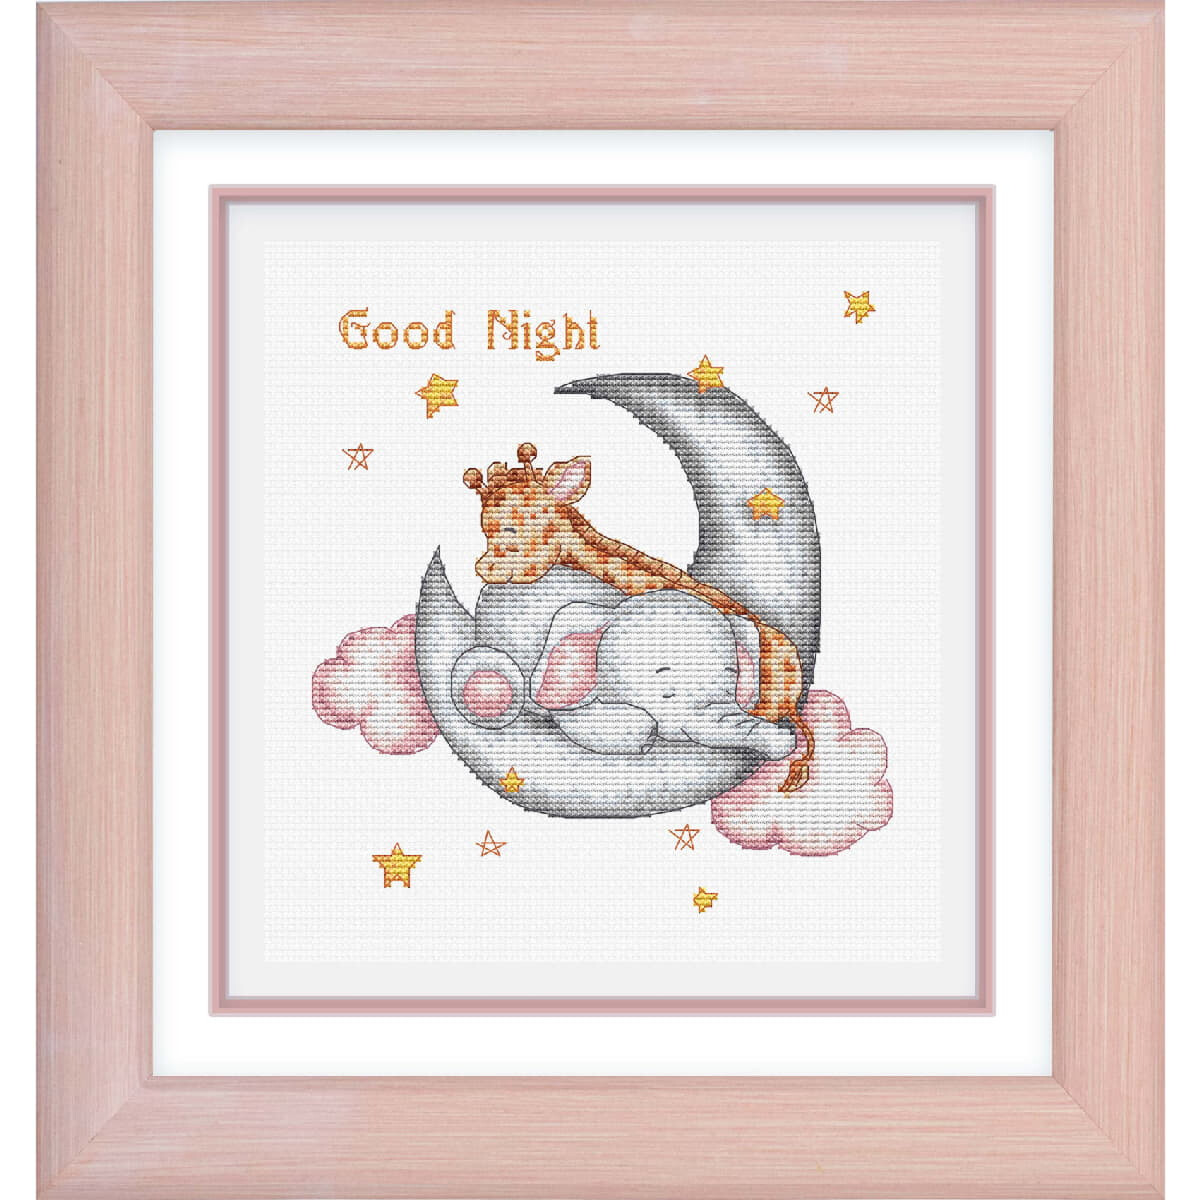 Luca-S counted cross stitch kit with frame "Good...